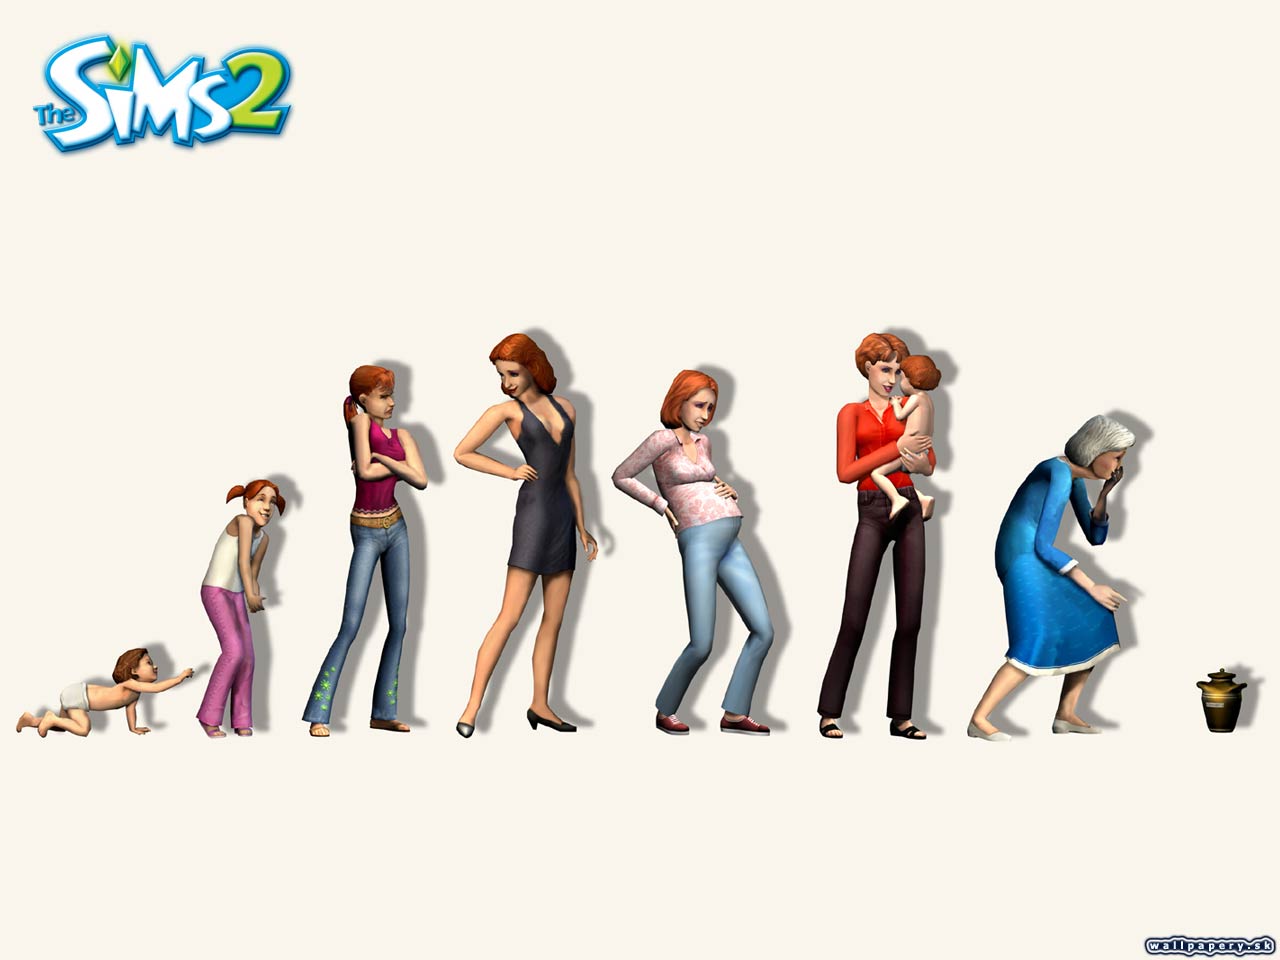 The Sims 2 - wallpaper 3